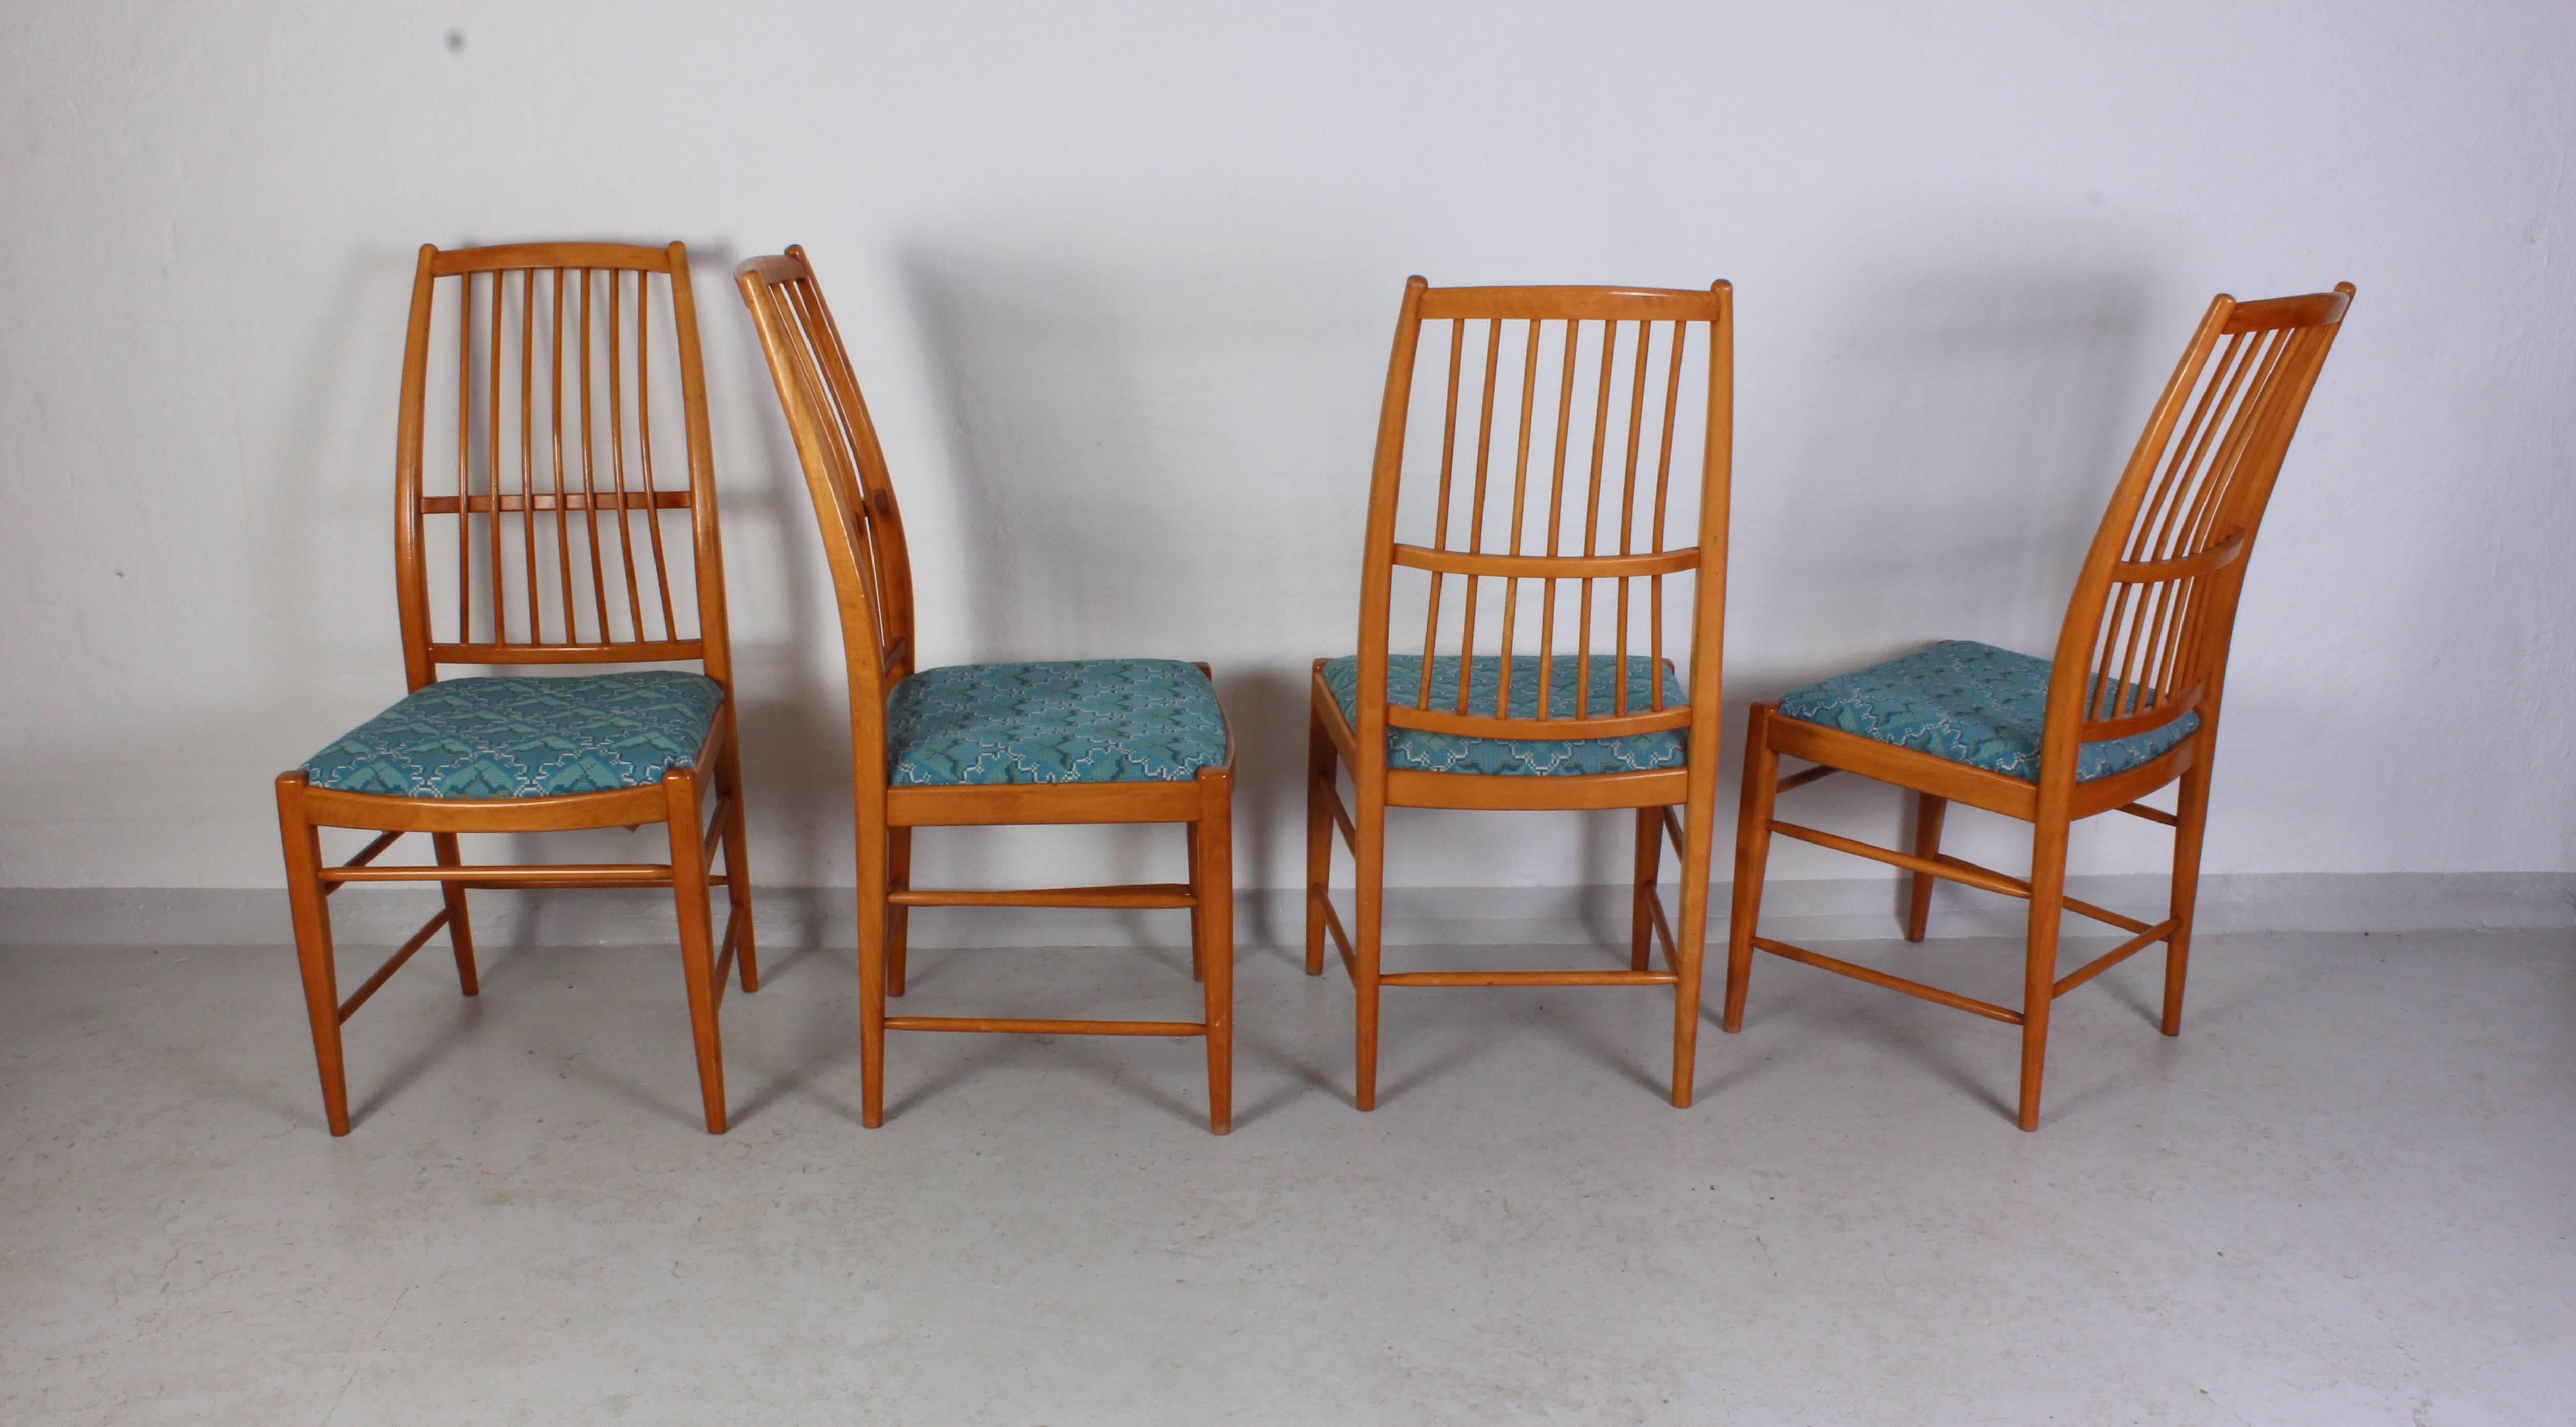 Set of four dining chairs model Napoli by Swedish designer David Rosén. These high back chairs are very comfortable and have a timeless design. David Rosén work as a designer for the famous Swedish manufacturer Nordiska Kompaniet who are famous for